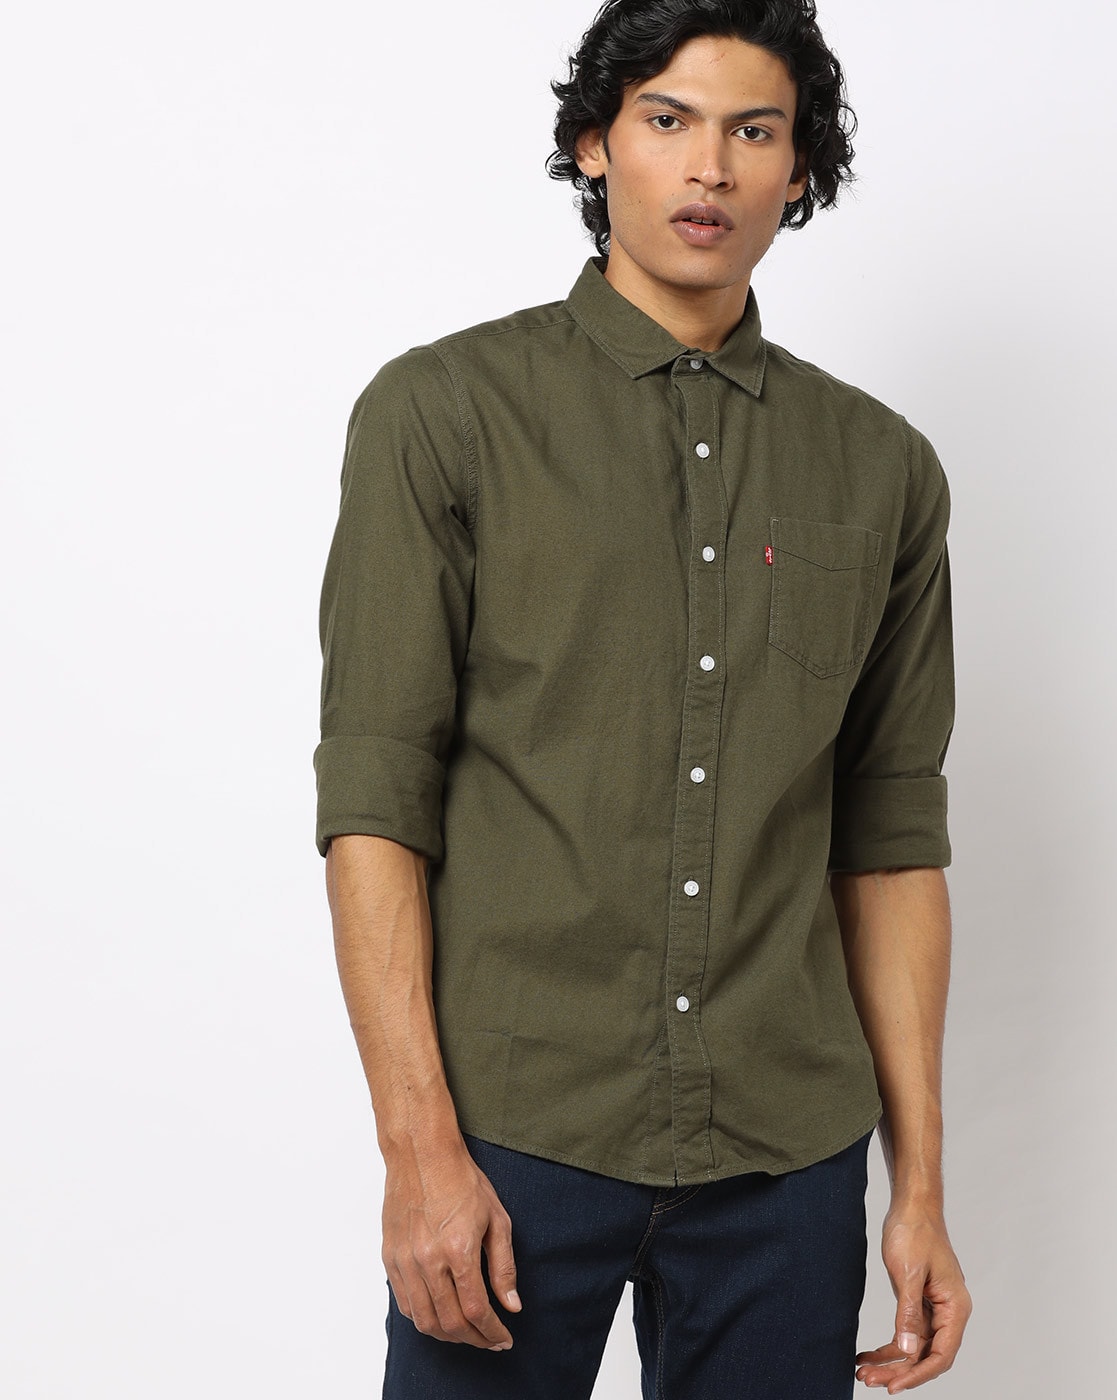 Buy Olive Green Shirts for Men by LEVIS Online 